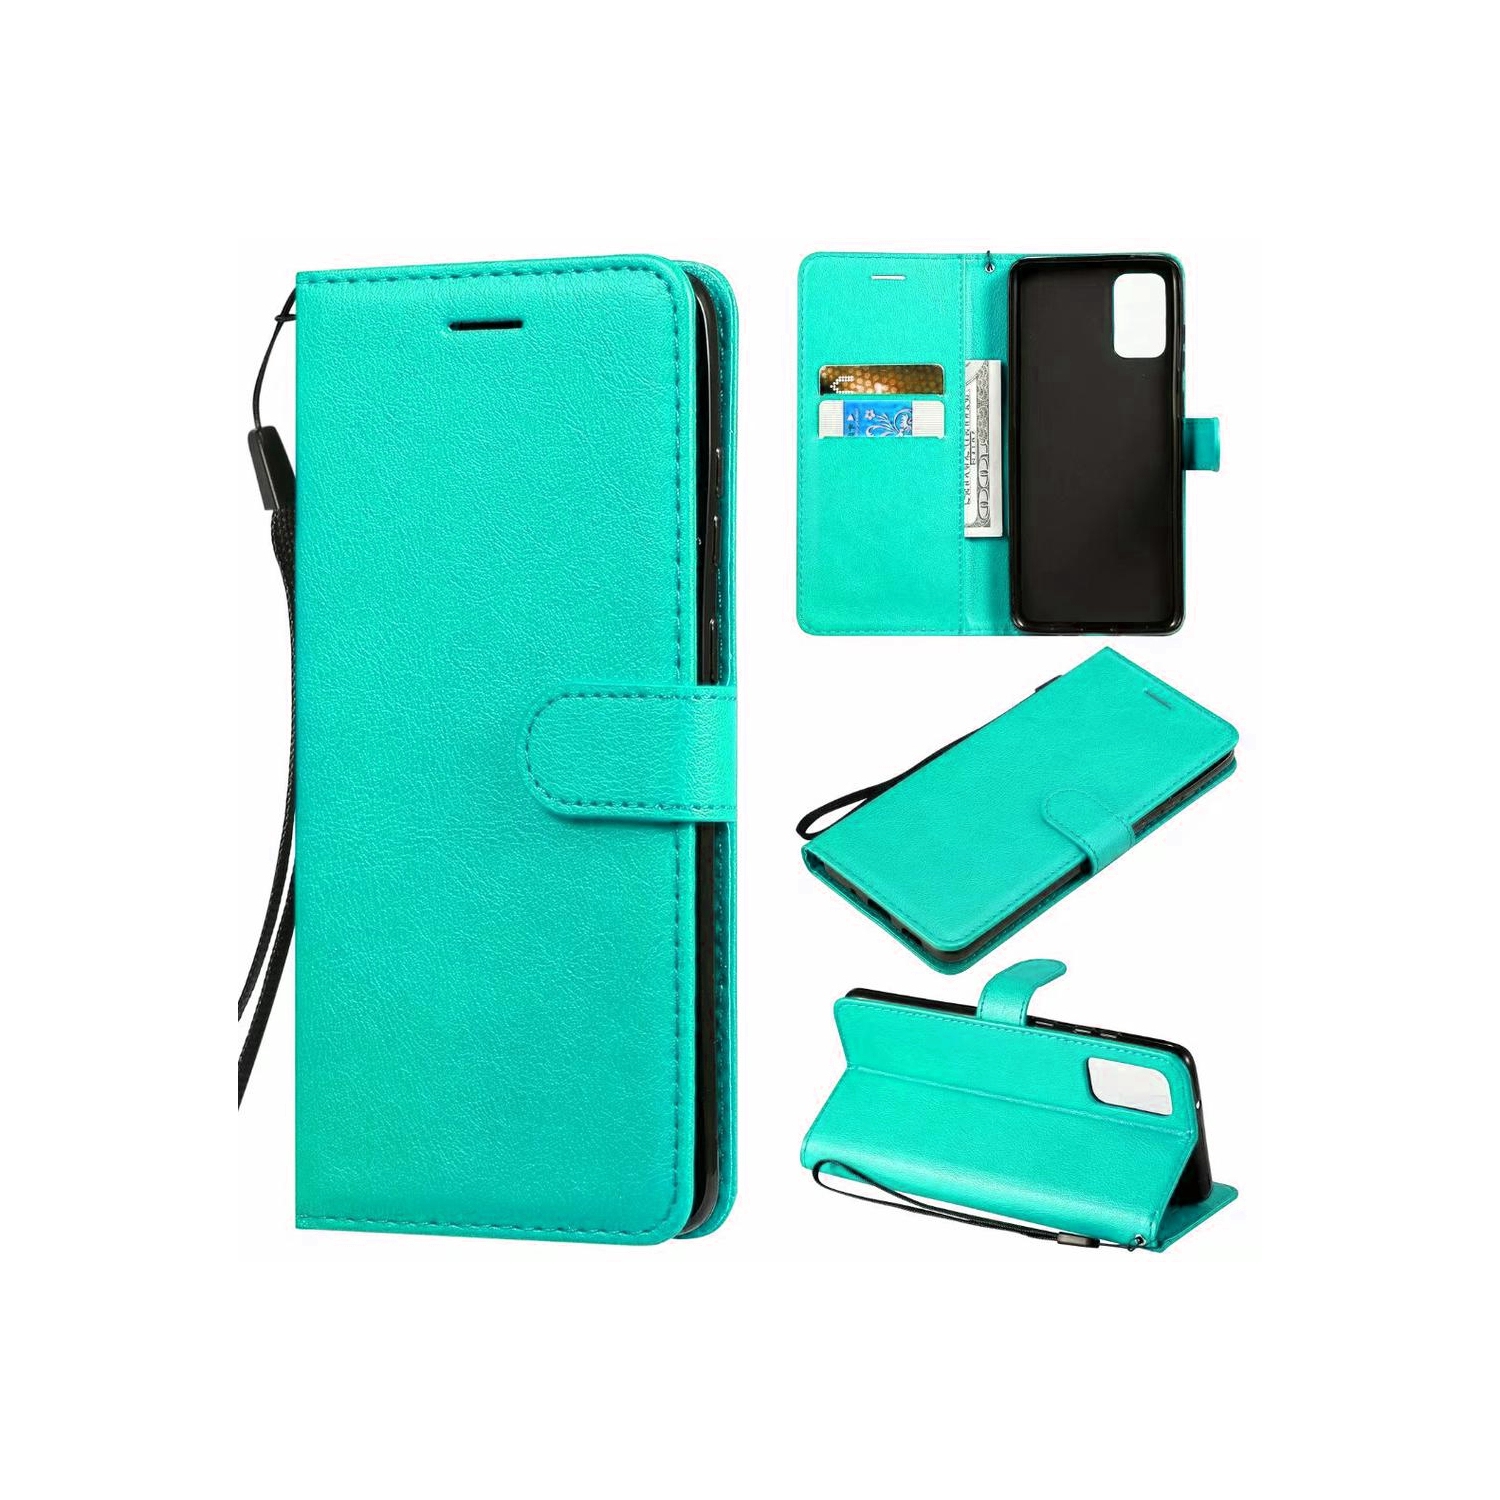 [CS] Samsung Galaxy A32 5G Case, Magnetic Leather Folio Wallet Flip Case Cover with Card Slot, Teal